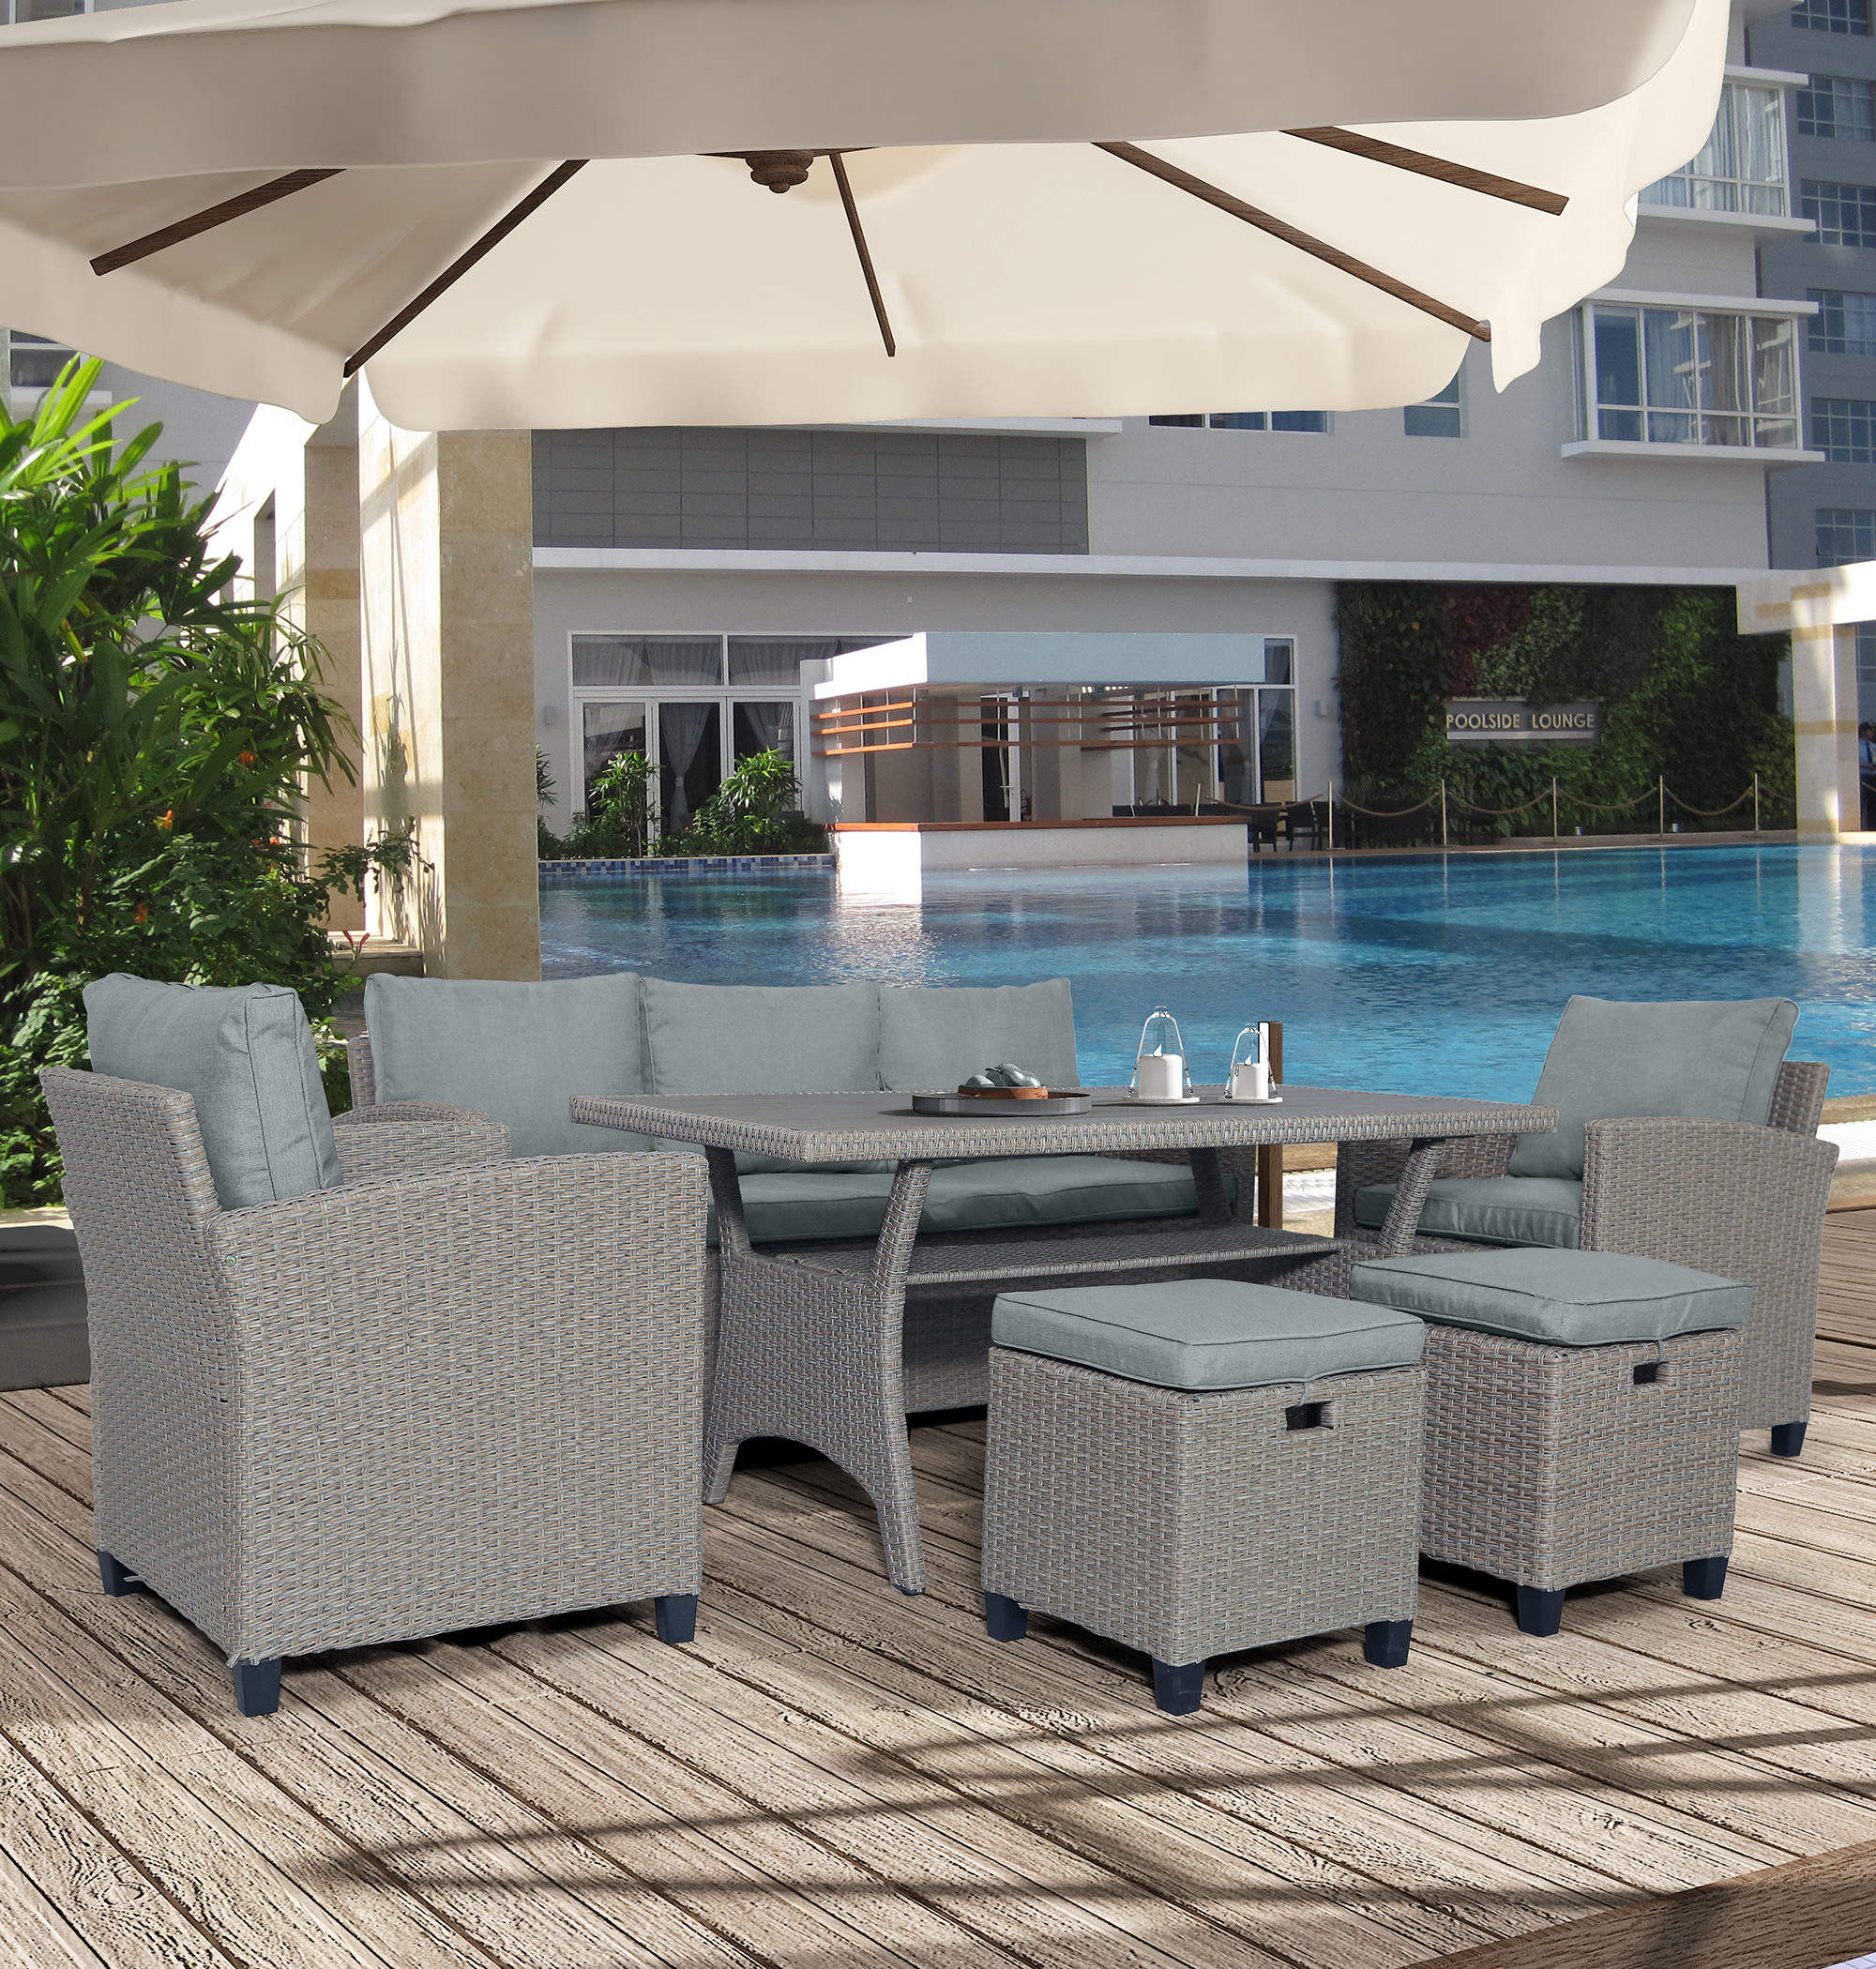 6 Pieces Outdoor Dining Sets, Sectional Sofa Patio Dining Table and Chairs Set, PE Rattan Conversation Set, Gray Wicker Garden Backyard Sectional Sofa - image 1 of 9